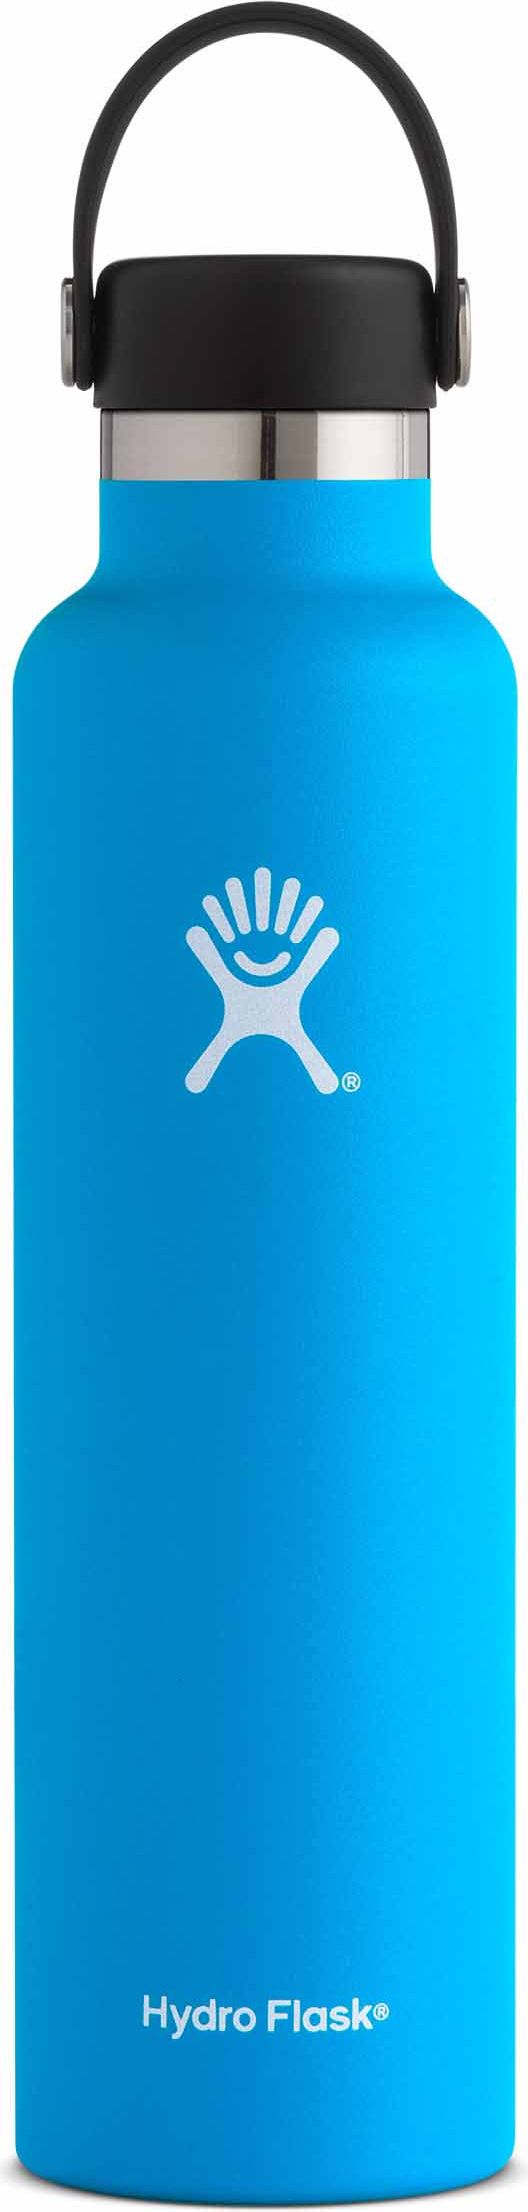 Hydro Flask Accessories 24oz Standard Mouth Pacific